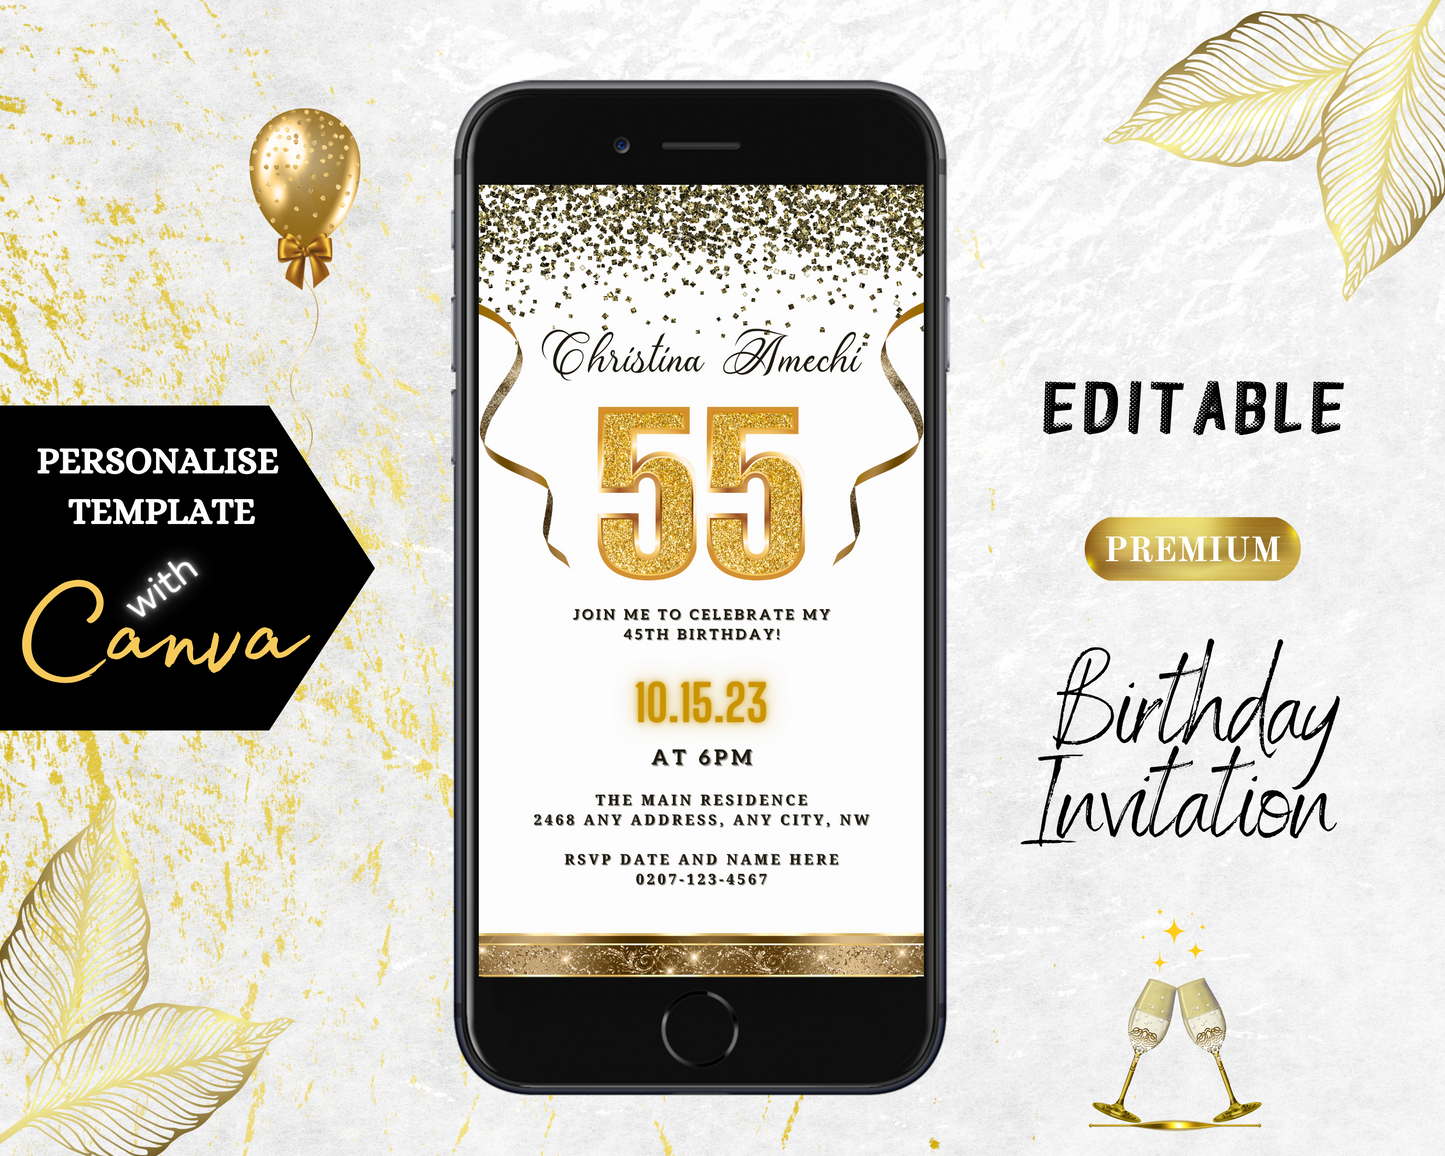 Customisable White Gold Confetti 55th Birthday Evite displayed on a smartphone screen, showcasing editable text and decorative elements, ready for digital personalization and sharing.